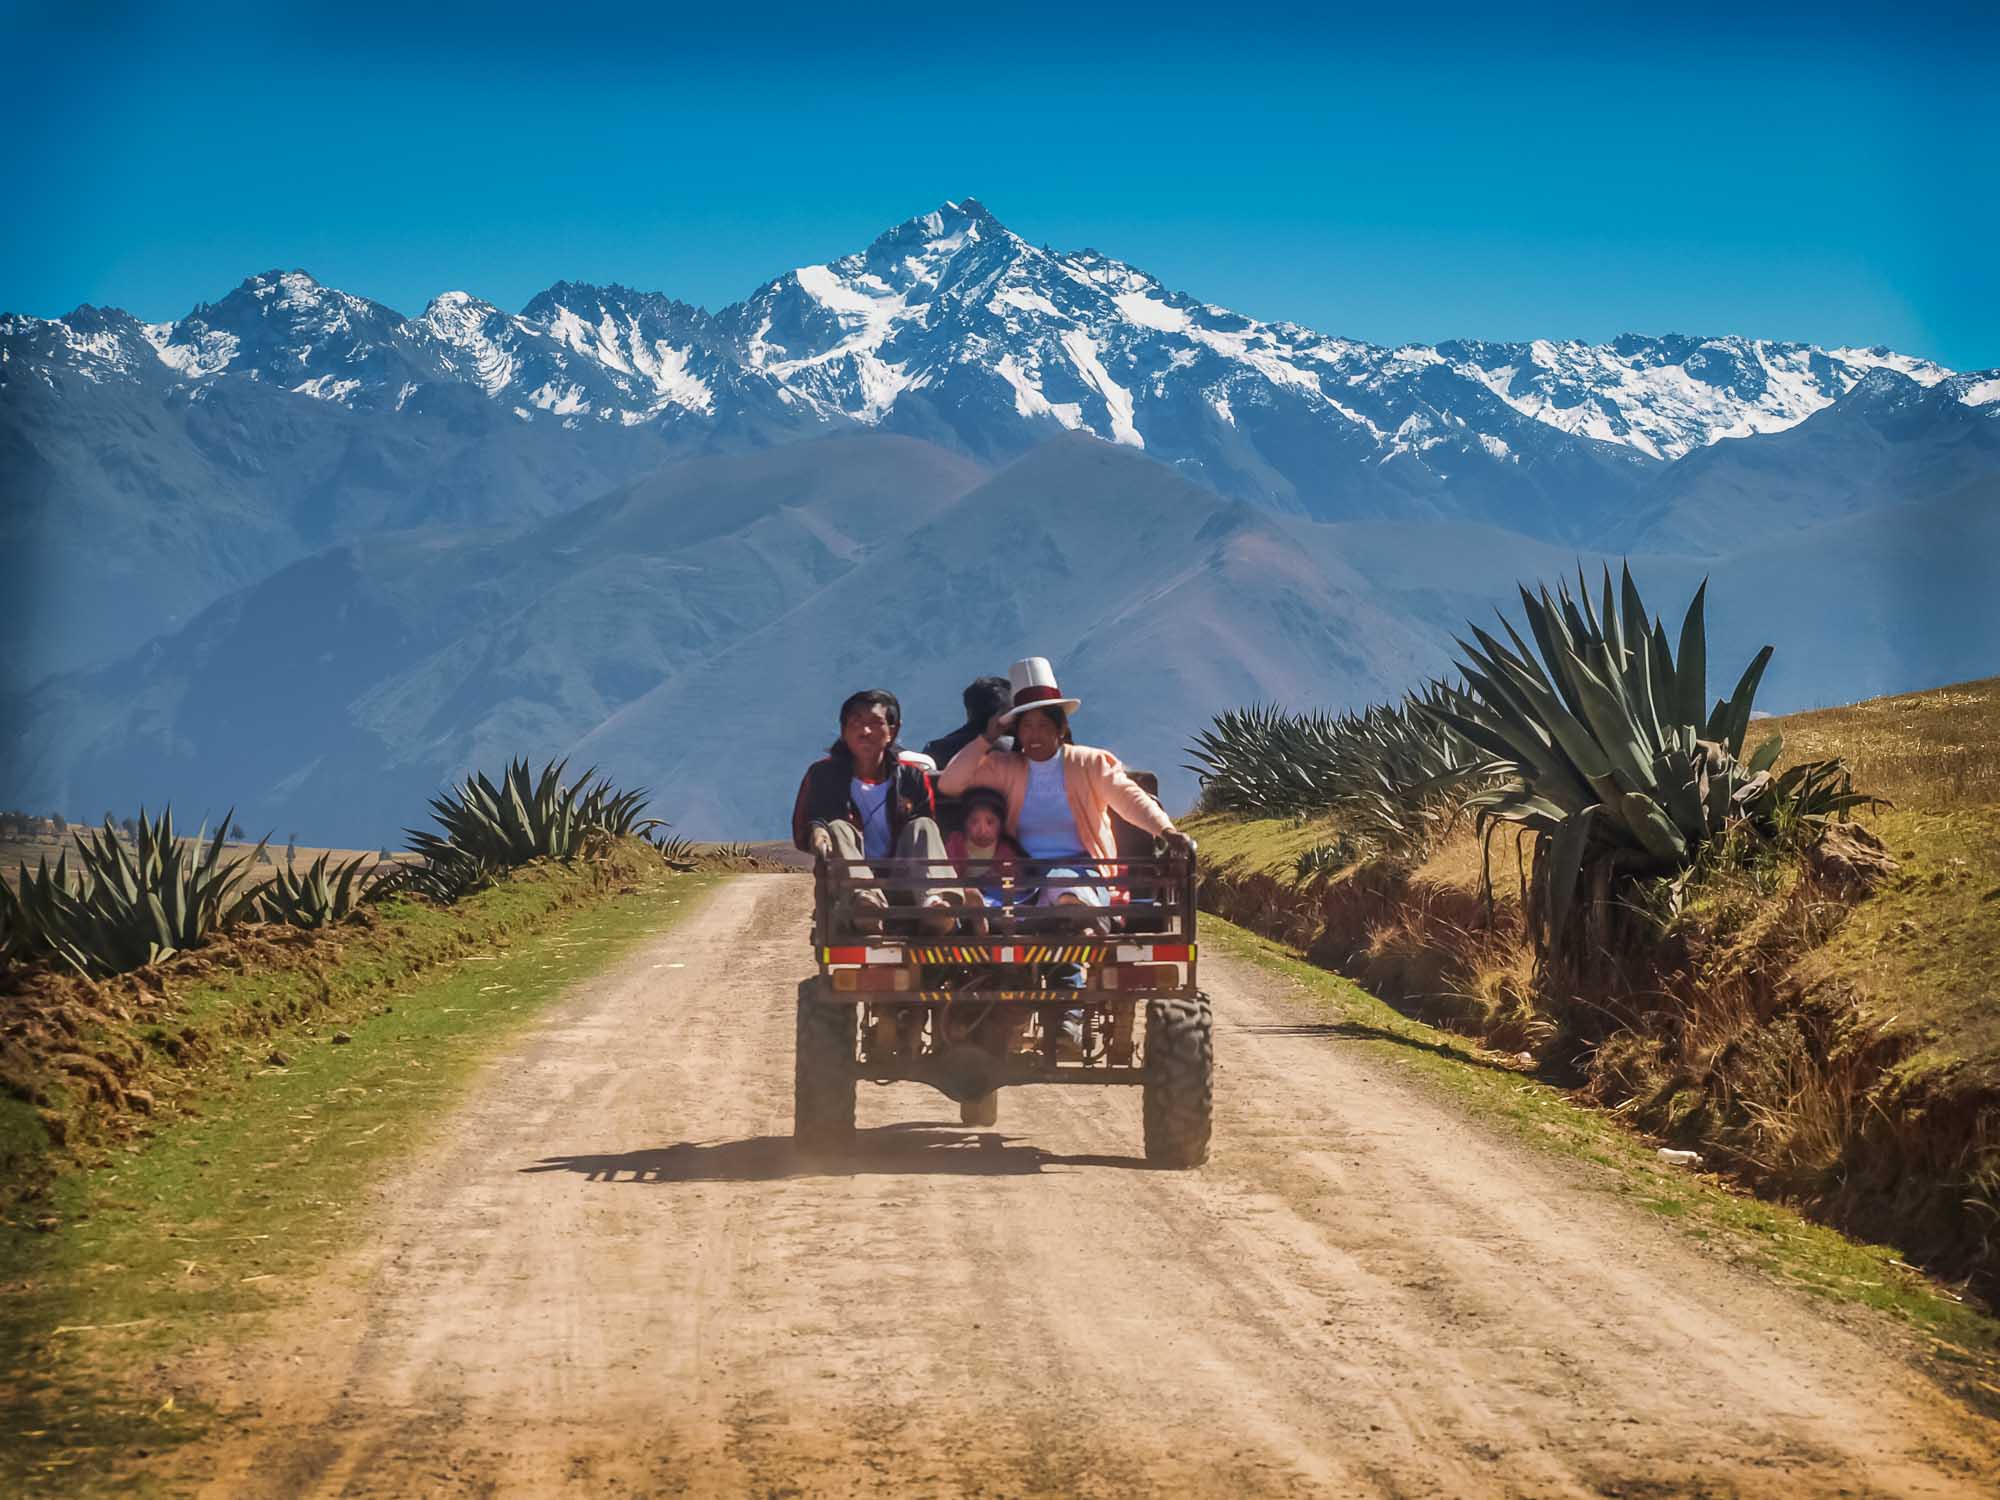 Peruvian family riding on the back of a tiny truck through a spectacular mountain landscape